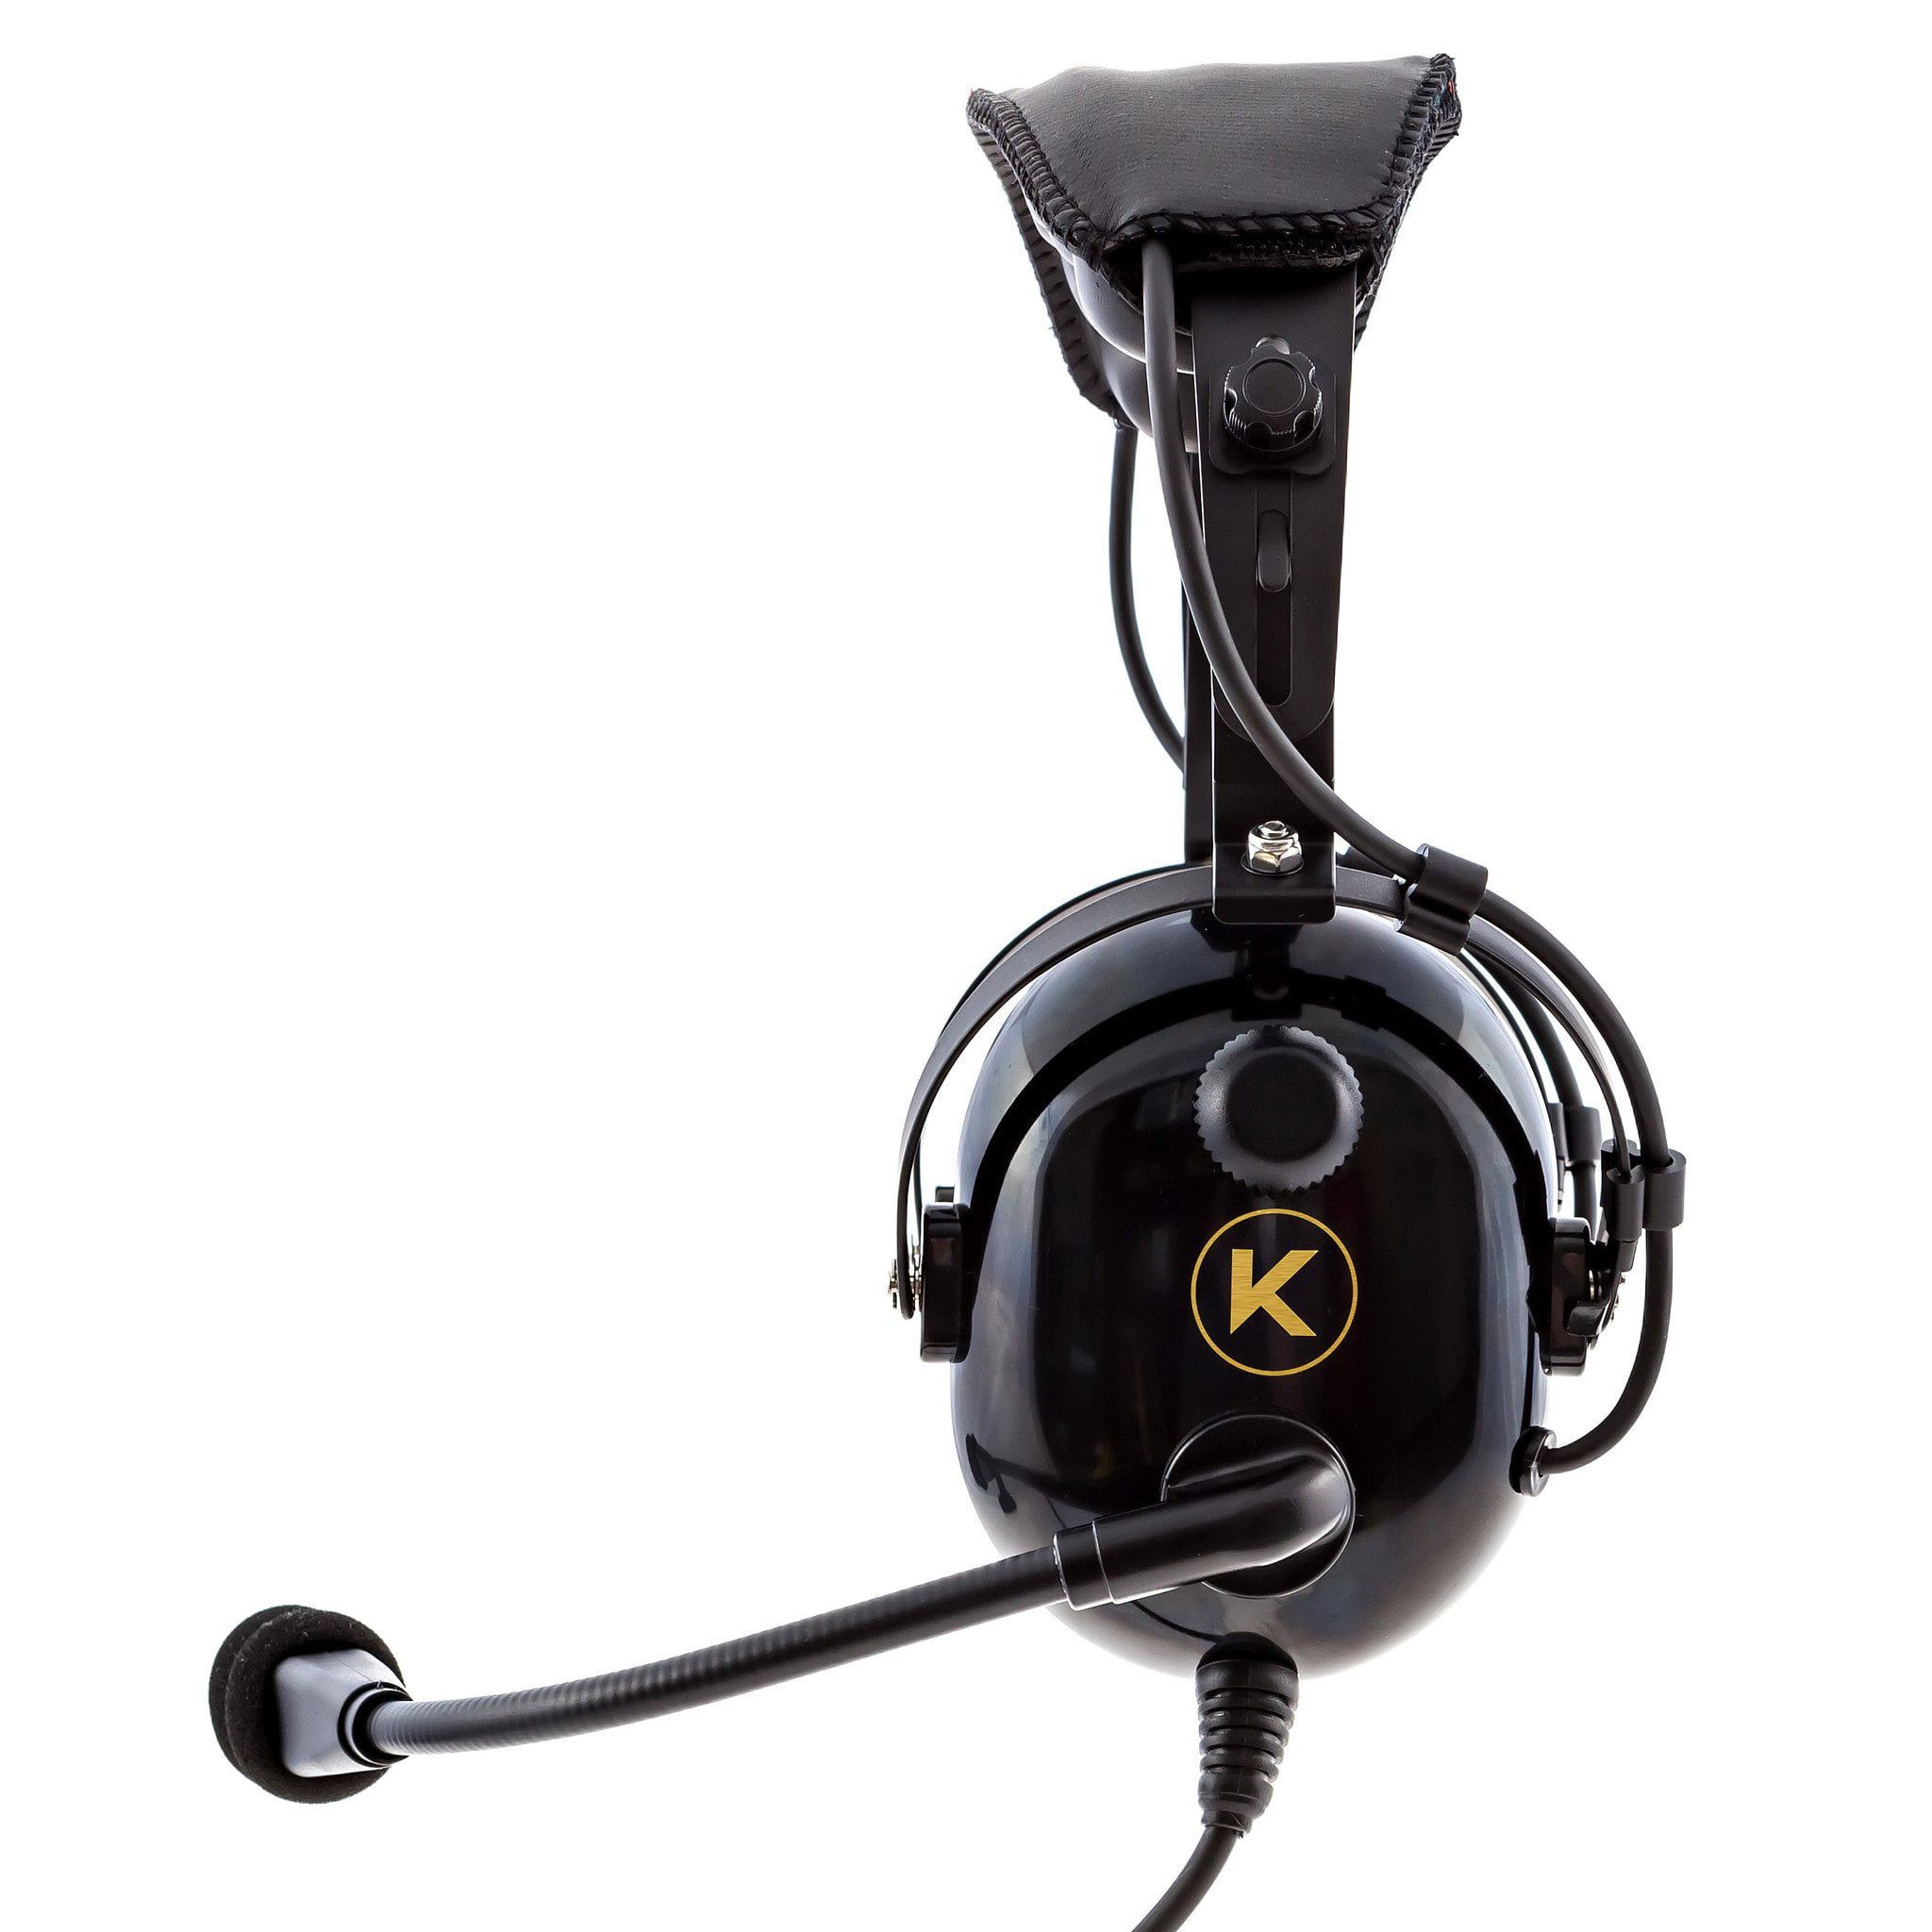 KORE AVIATION KA-1 General Aviation Headset for Pilots Headset Bag Mono and Stereo Compatibility Adjustable Headband Noise Canceling Microphone Gel Ear Seals Passive Noise Reduction 